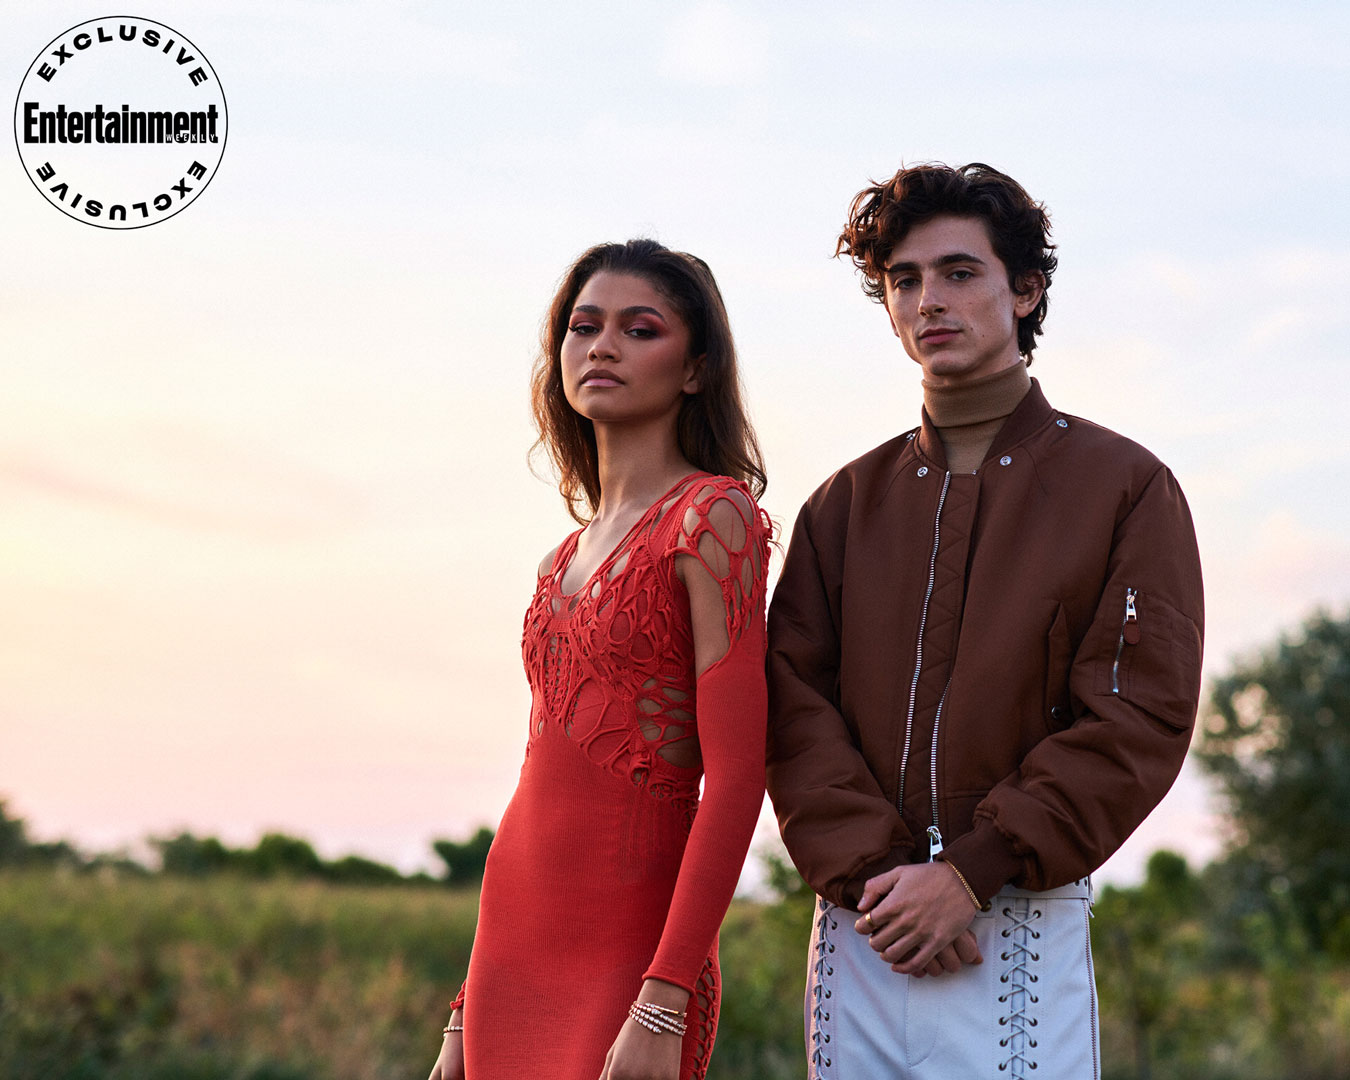 Zendaya and Timothée Chalamet pose for photos, during an Entertainment Weekly photo shoot in Venice.